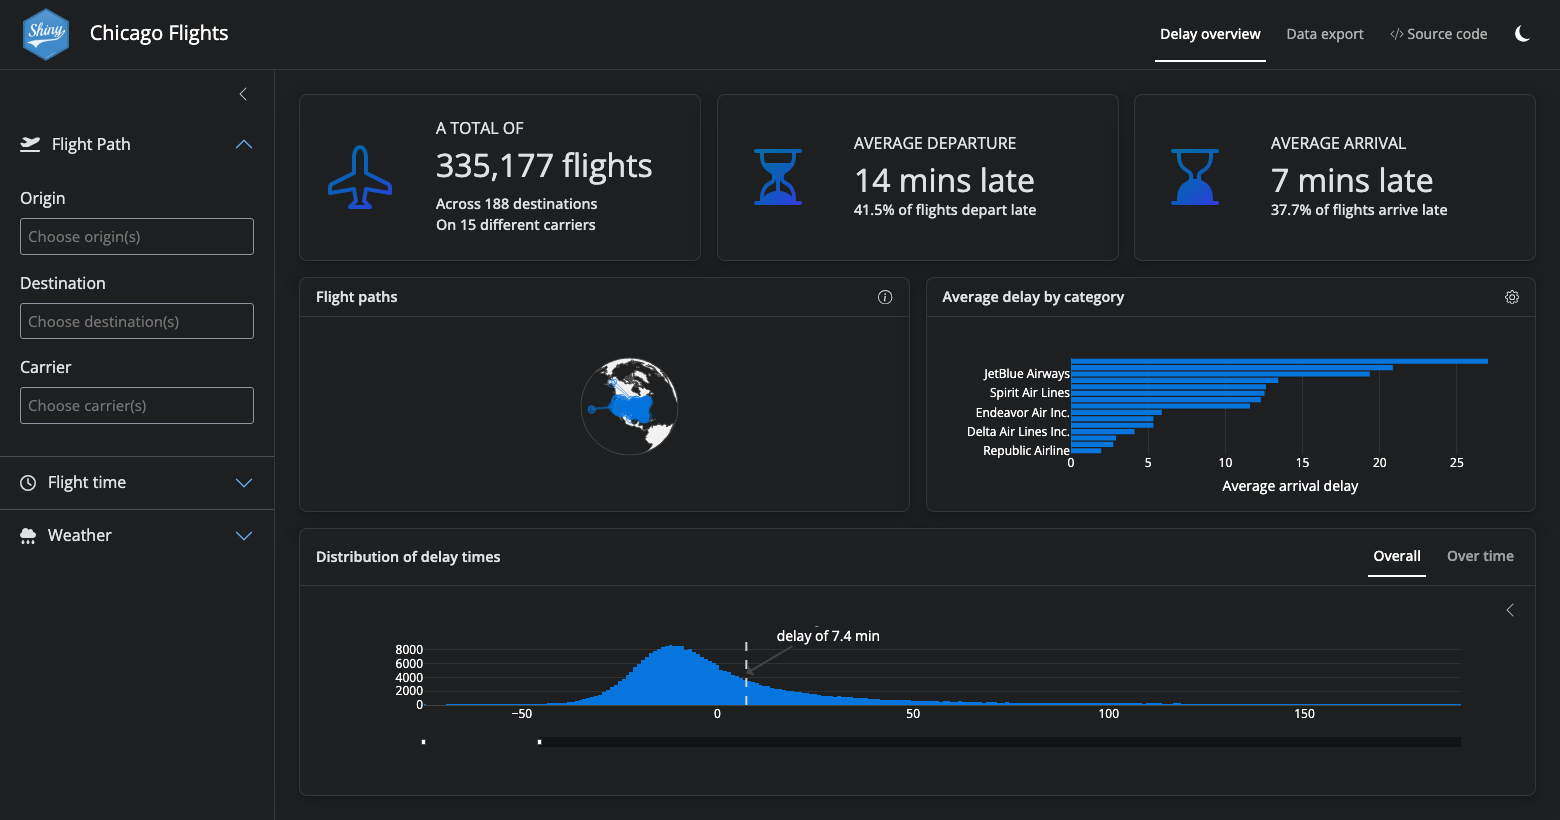 Flights dashboard in dark mode. All white areas are now a deep dark gray. The blue accents remain.